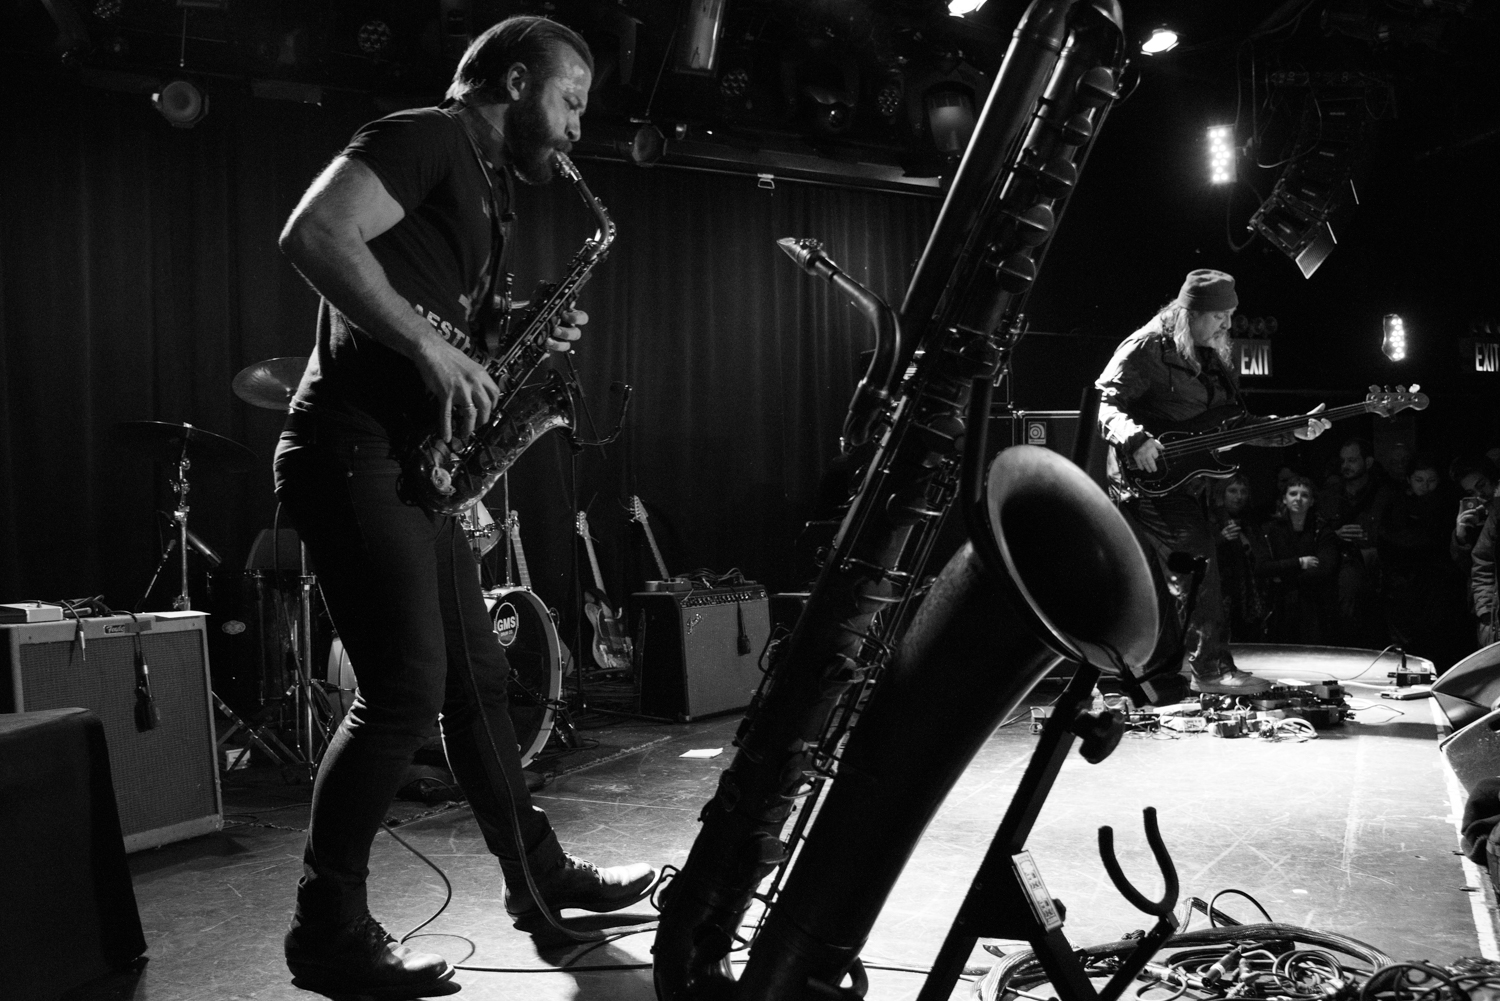 Colin Stetson on saxophone and Bill Laswell on electric bass, performing at (Le) Poisson Rouge on Wednesday night, January 13.